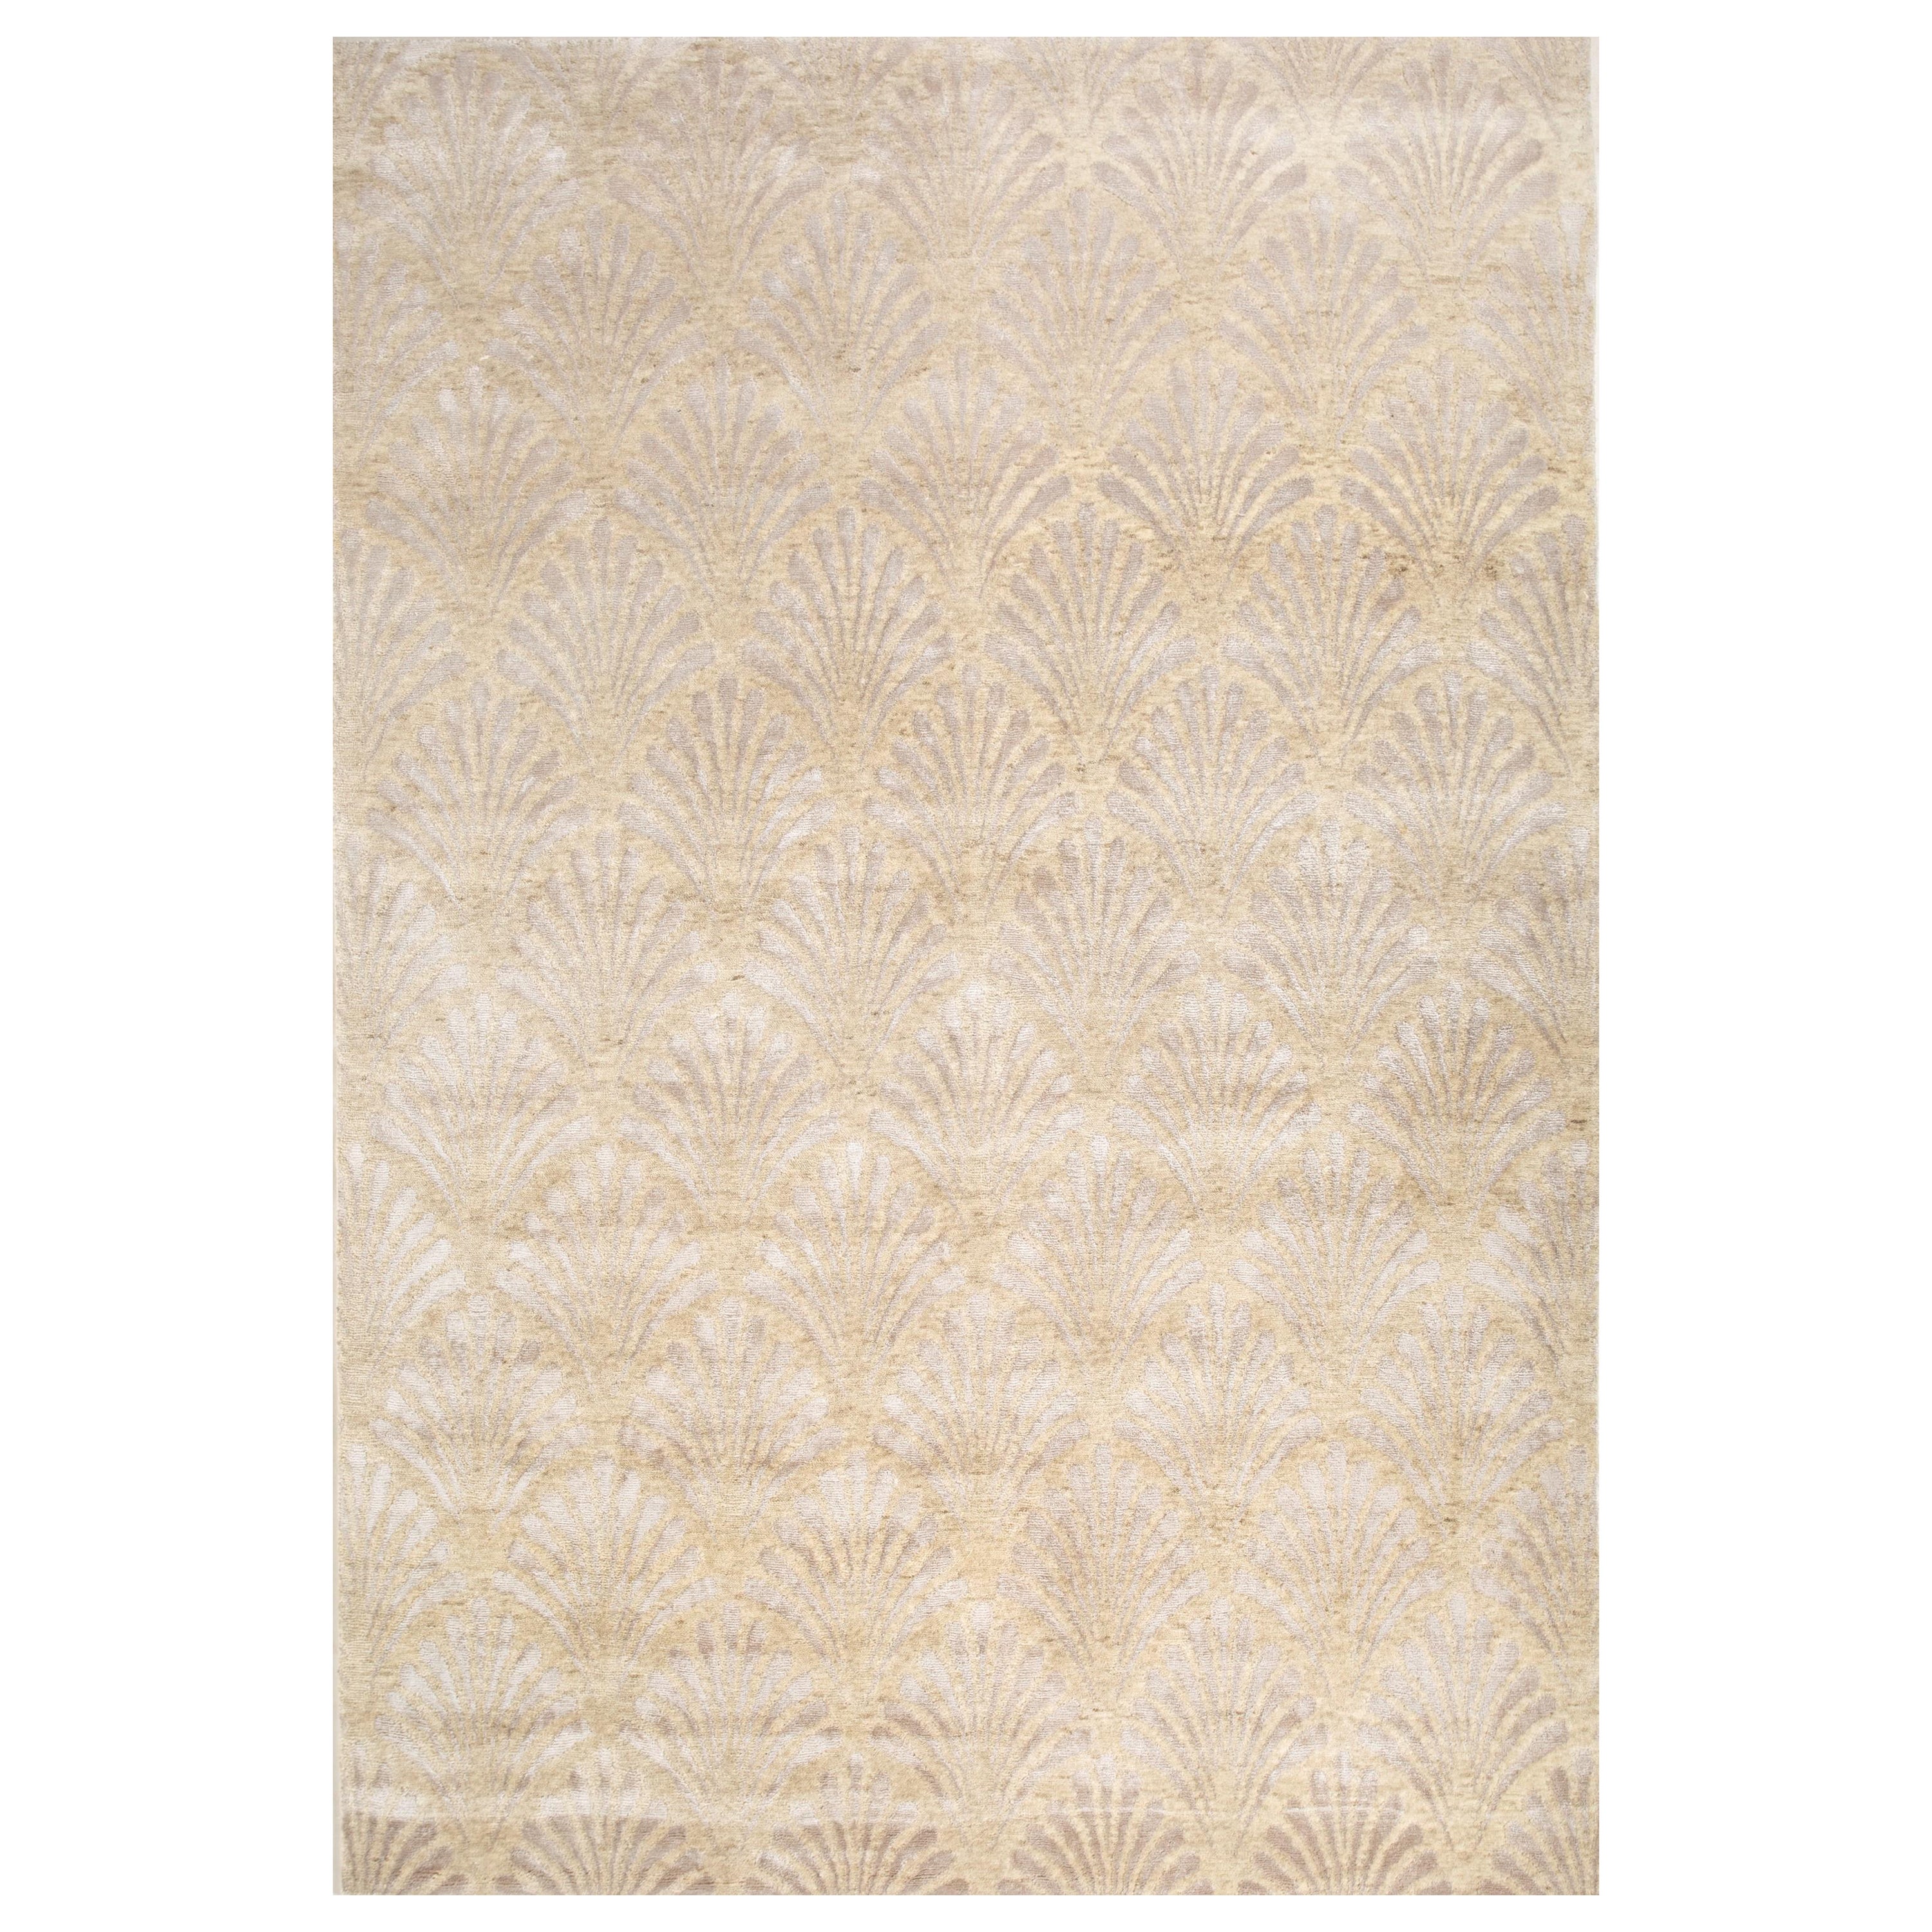 Serenity Bliss Medium Tan & White 180X270 cm Handknotted Rug For Sale